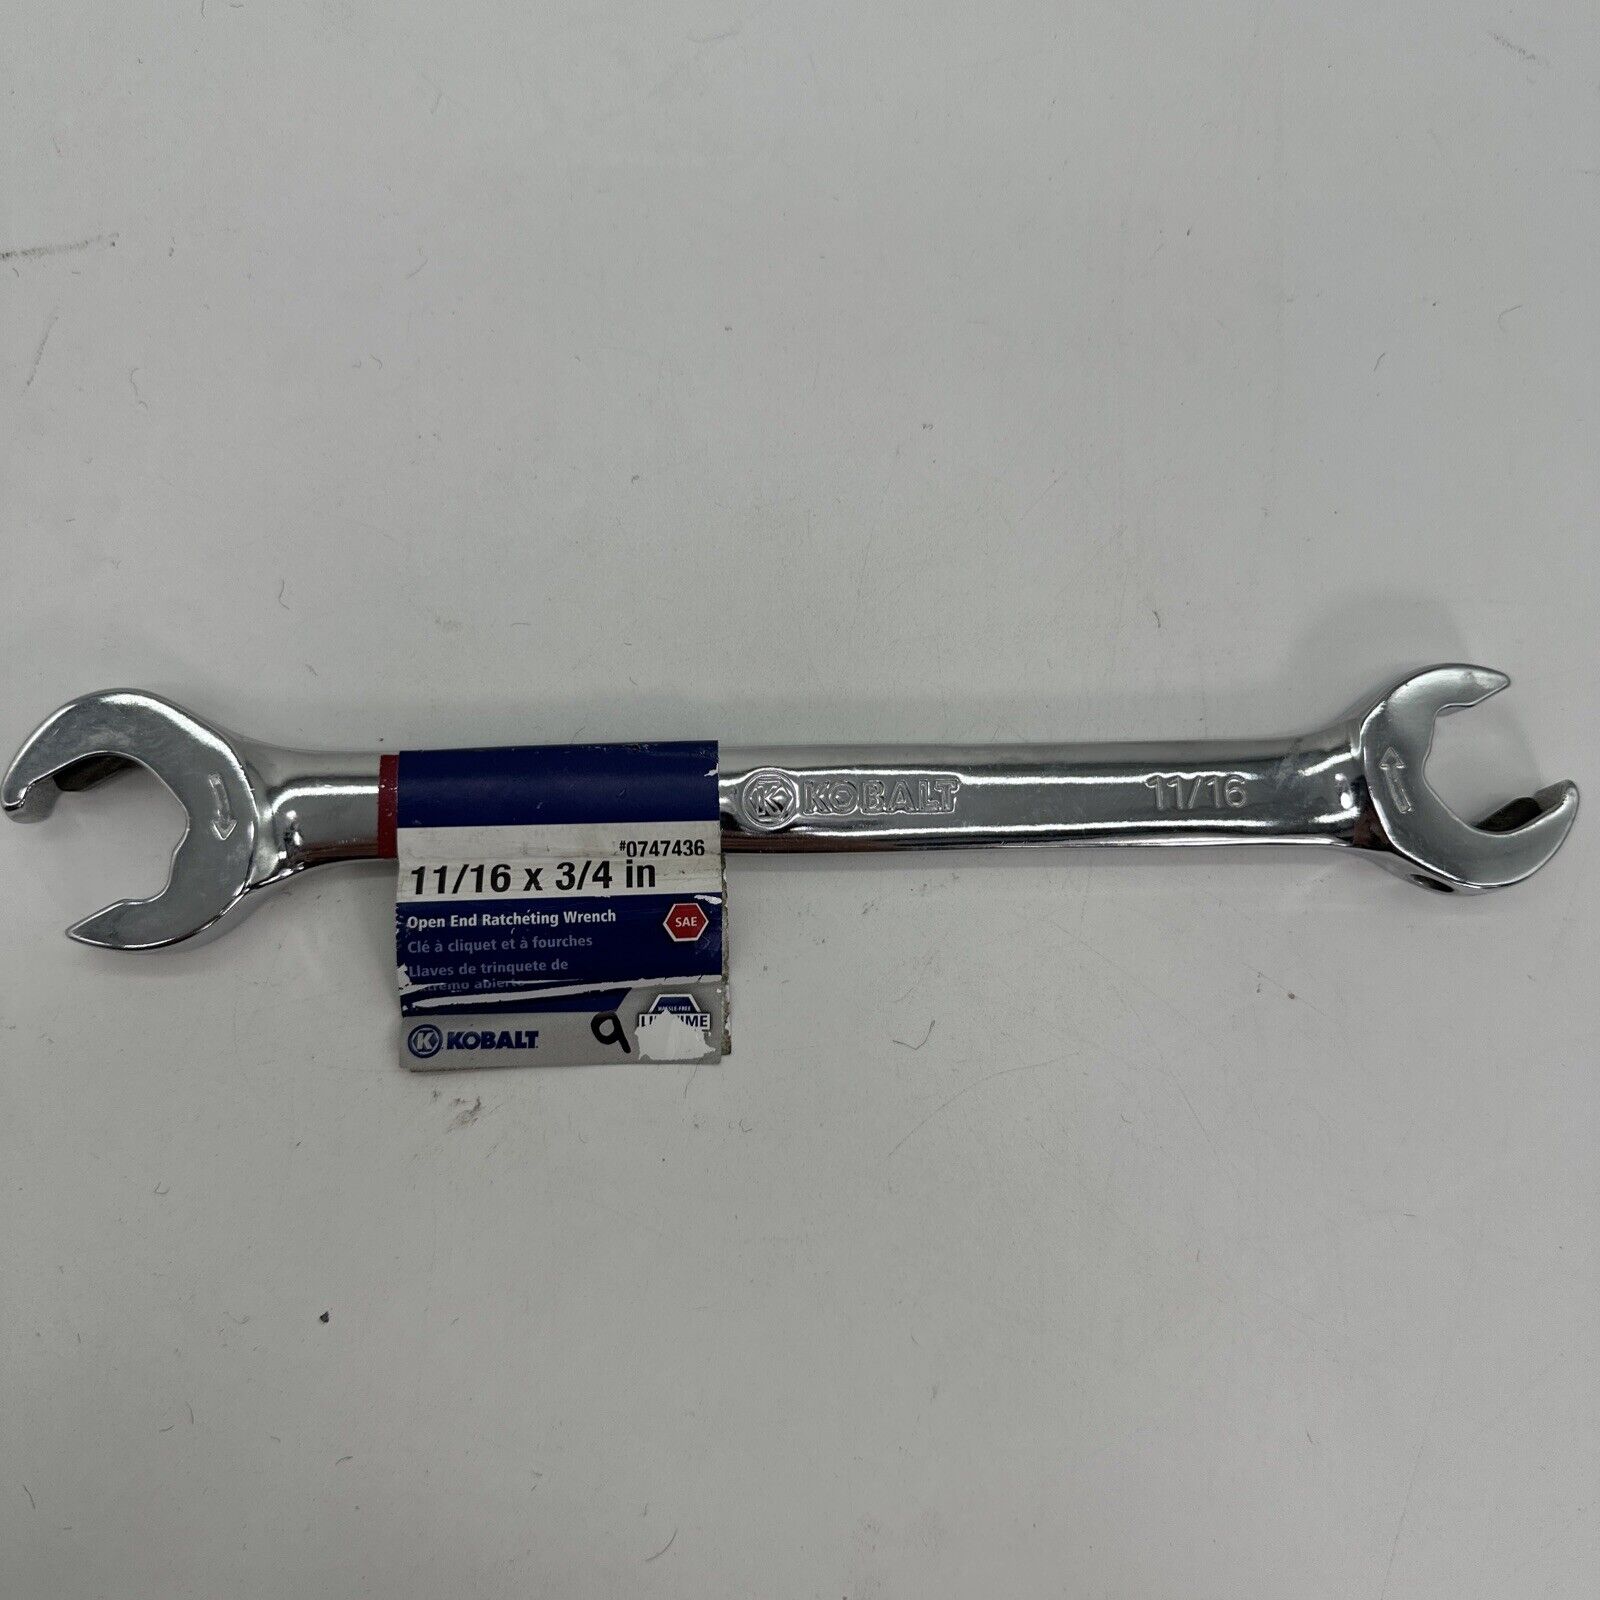 Kobalt 11/16 X 3/4 In Open End Ratcheting Wrench 🔧 New